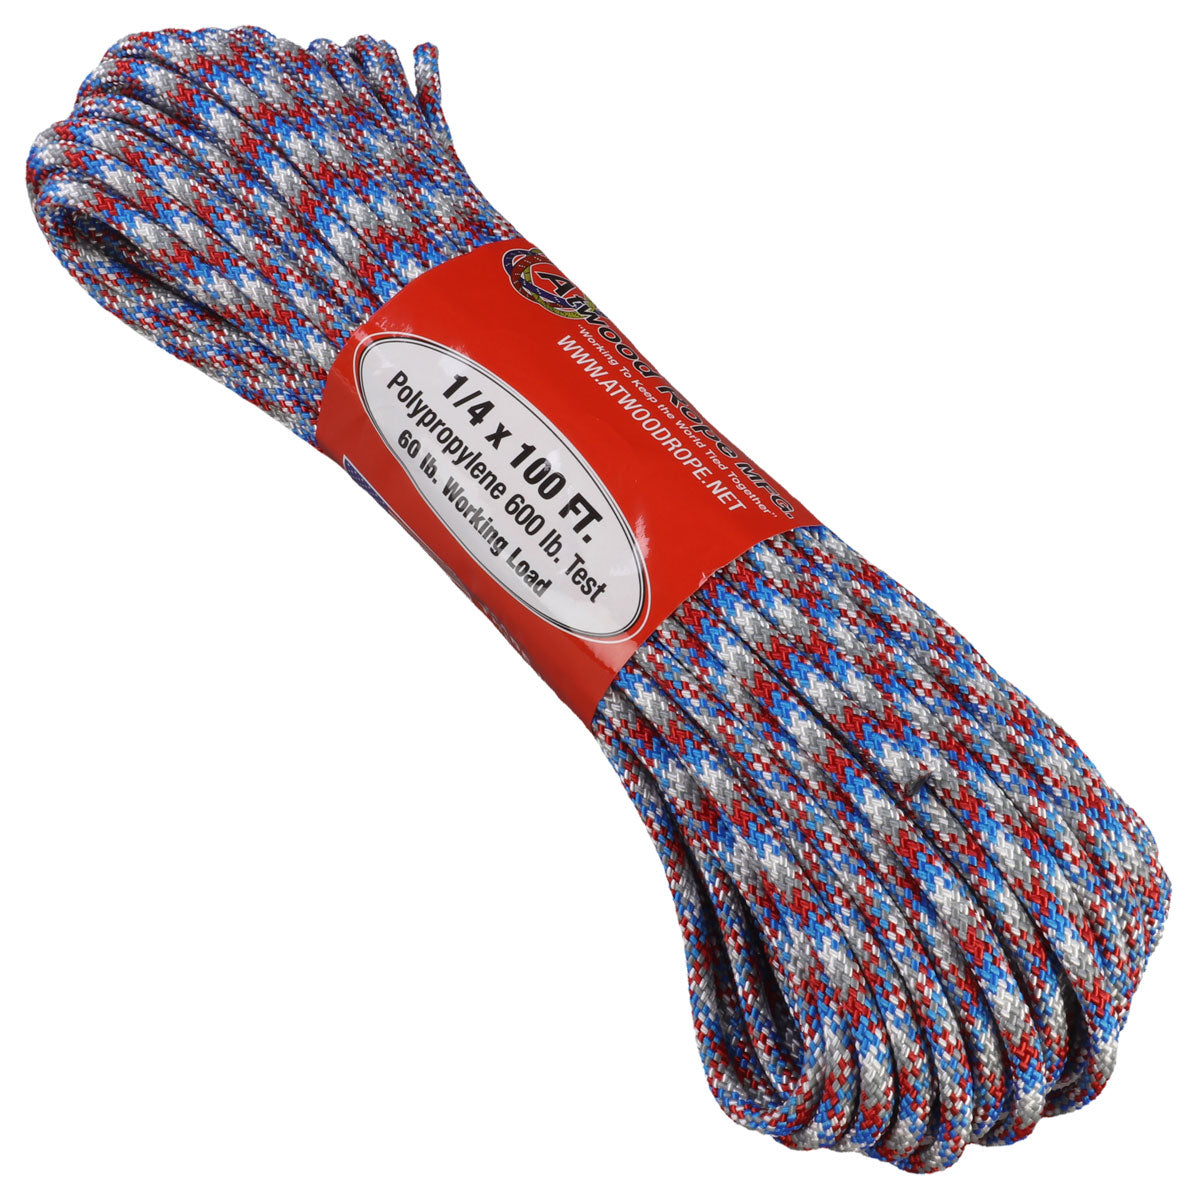 Atwood Rope MFG 1/4 in 100 ft Polypropylene Rope